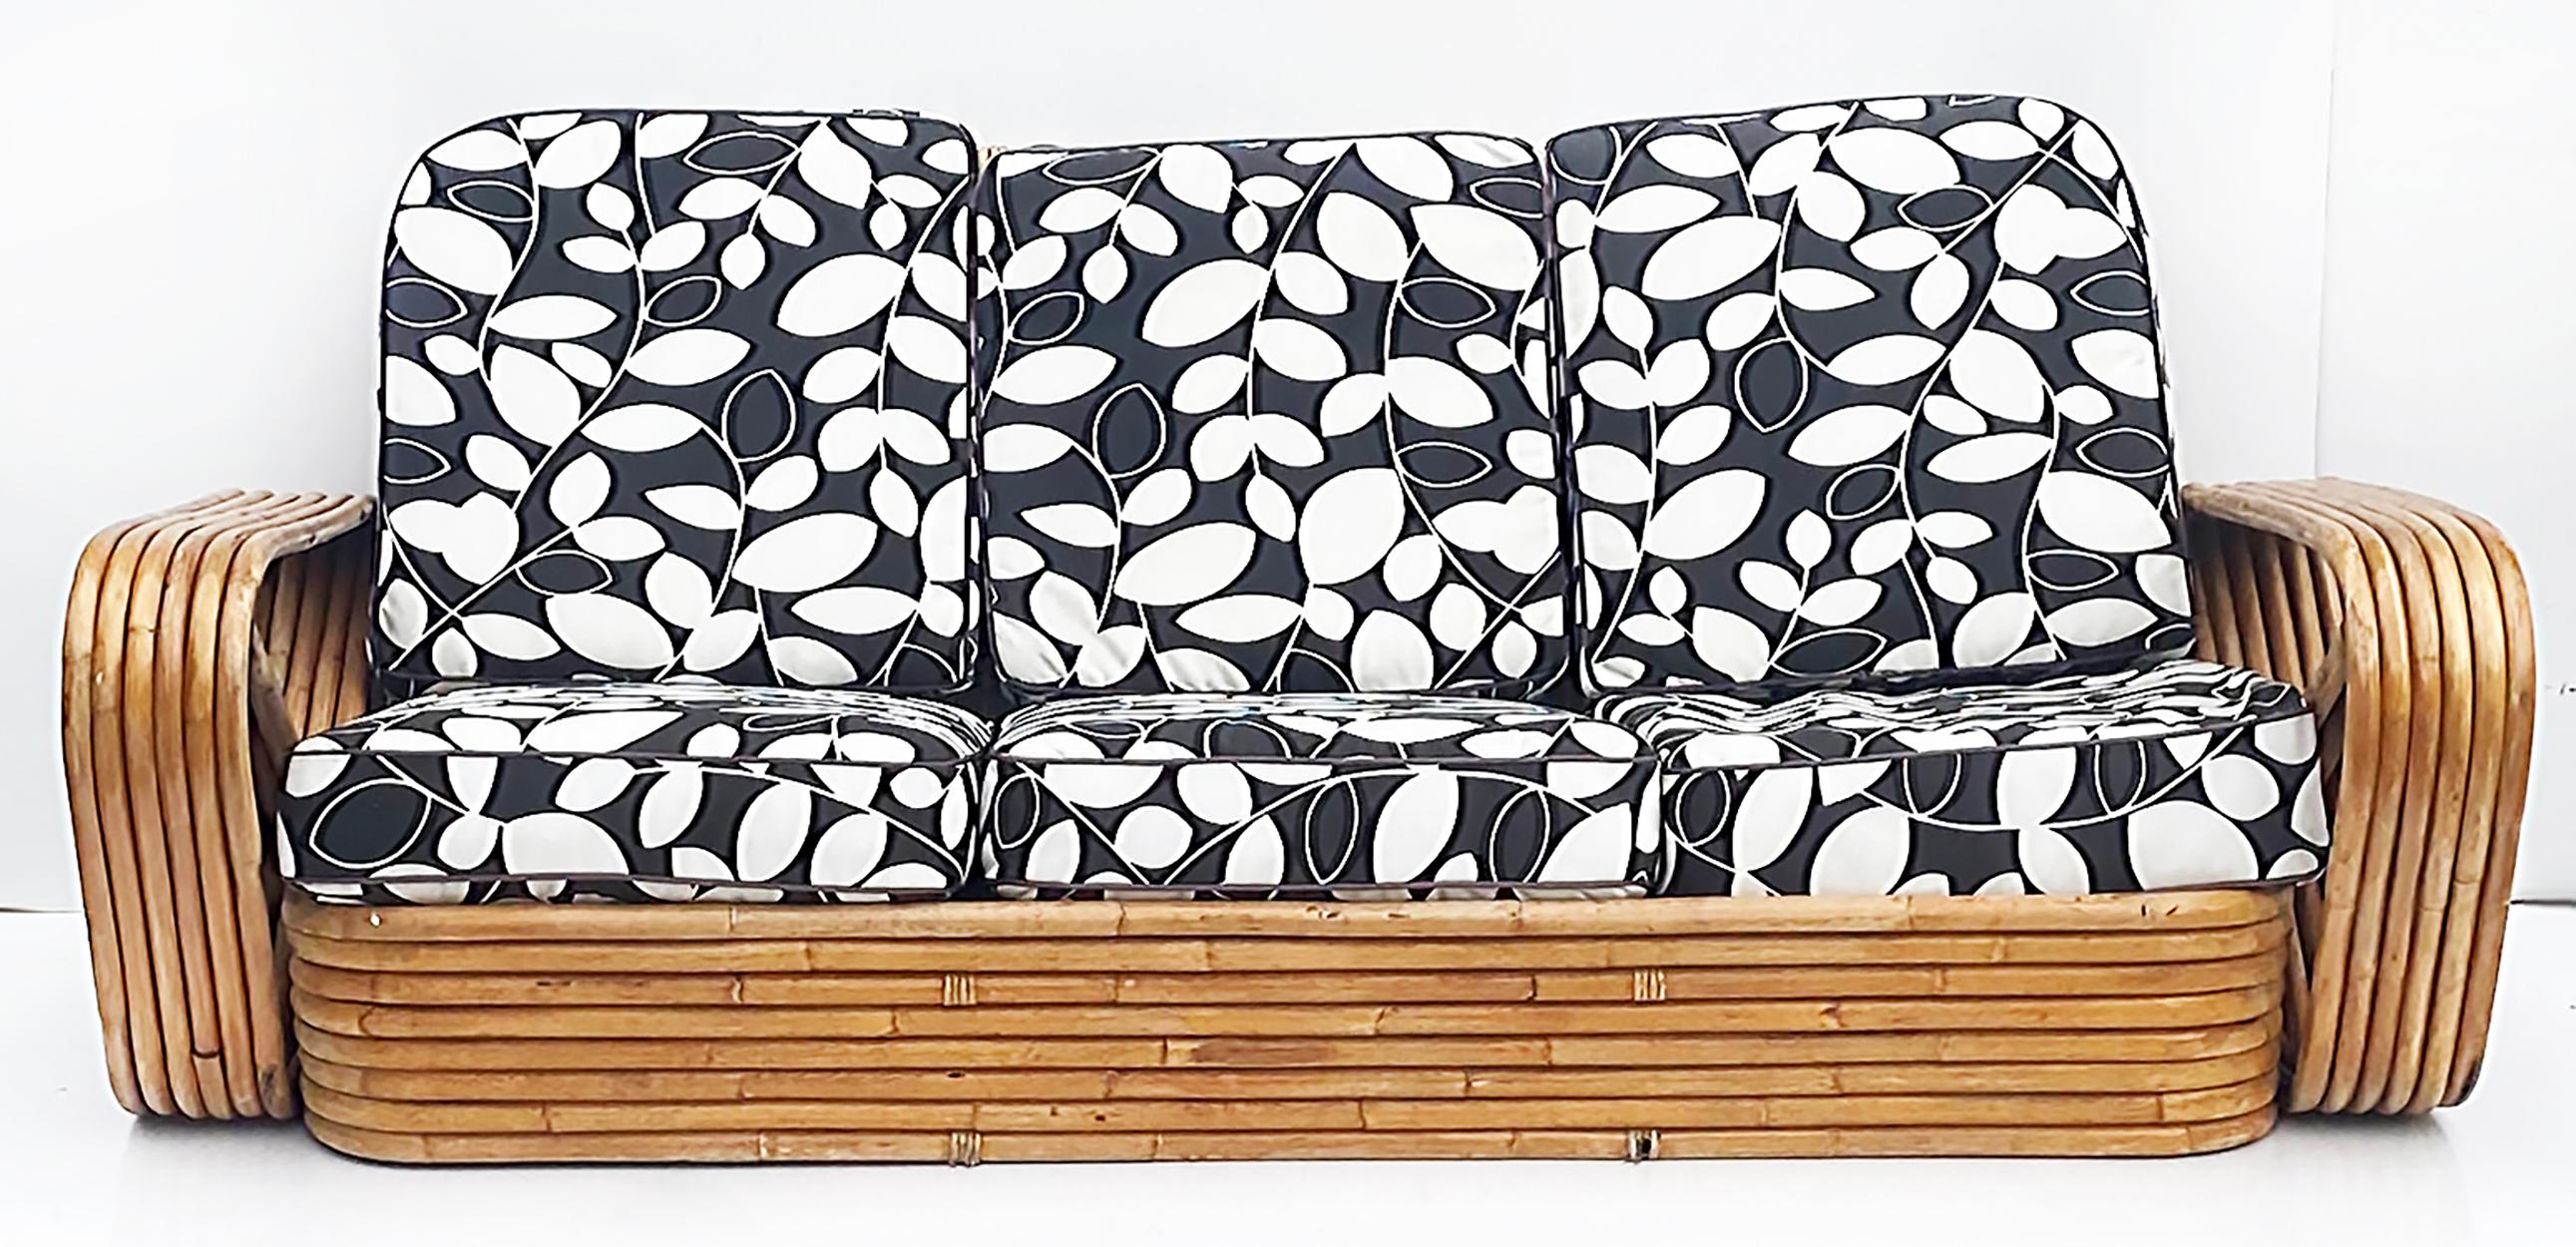 Paul Frankl Pretzel Six strand 3-Seat Rattan Bamboo Sofa

Offered for sale is a Paul Frankl six-strand three-seat bamboo and rattan sofa with loose seat and back upholstered cushions. The upholstery fabric is a black-and-white print with a